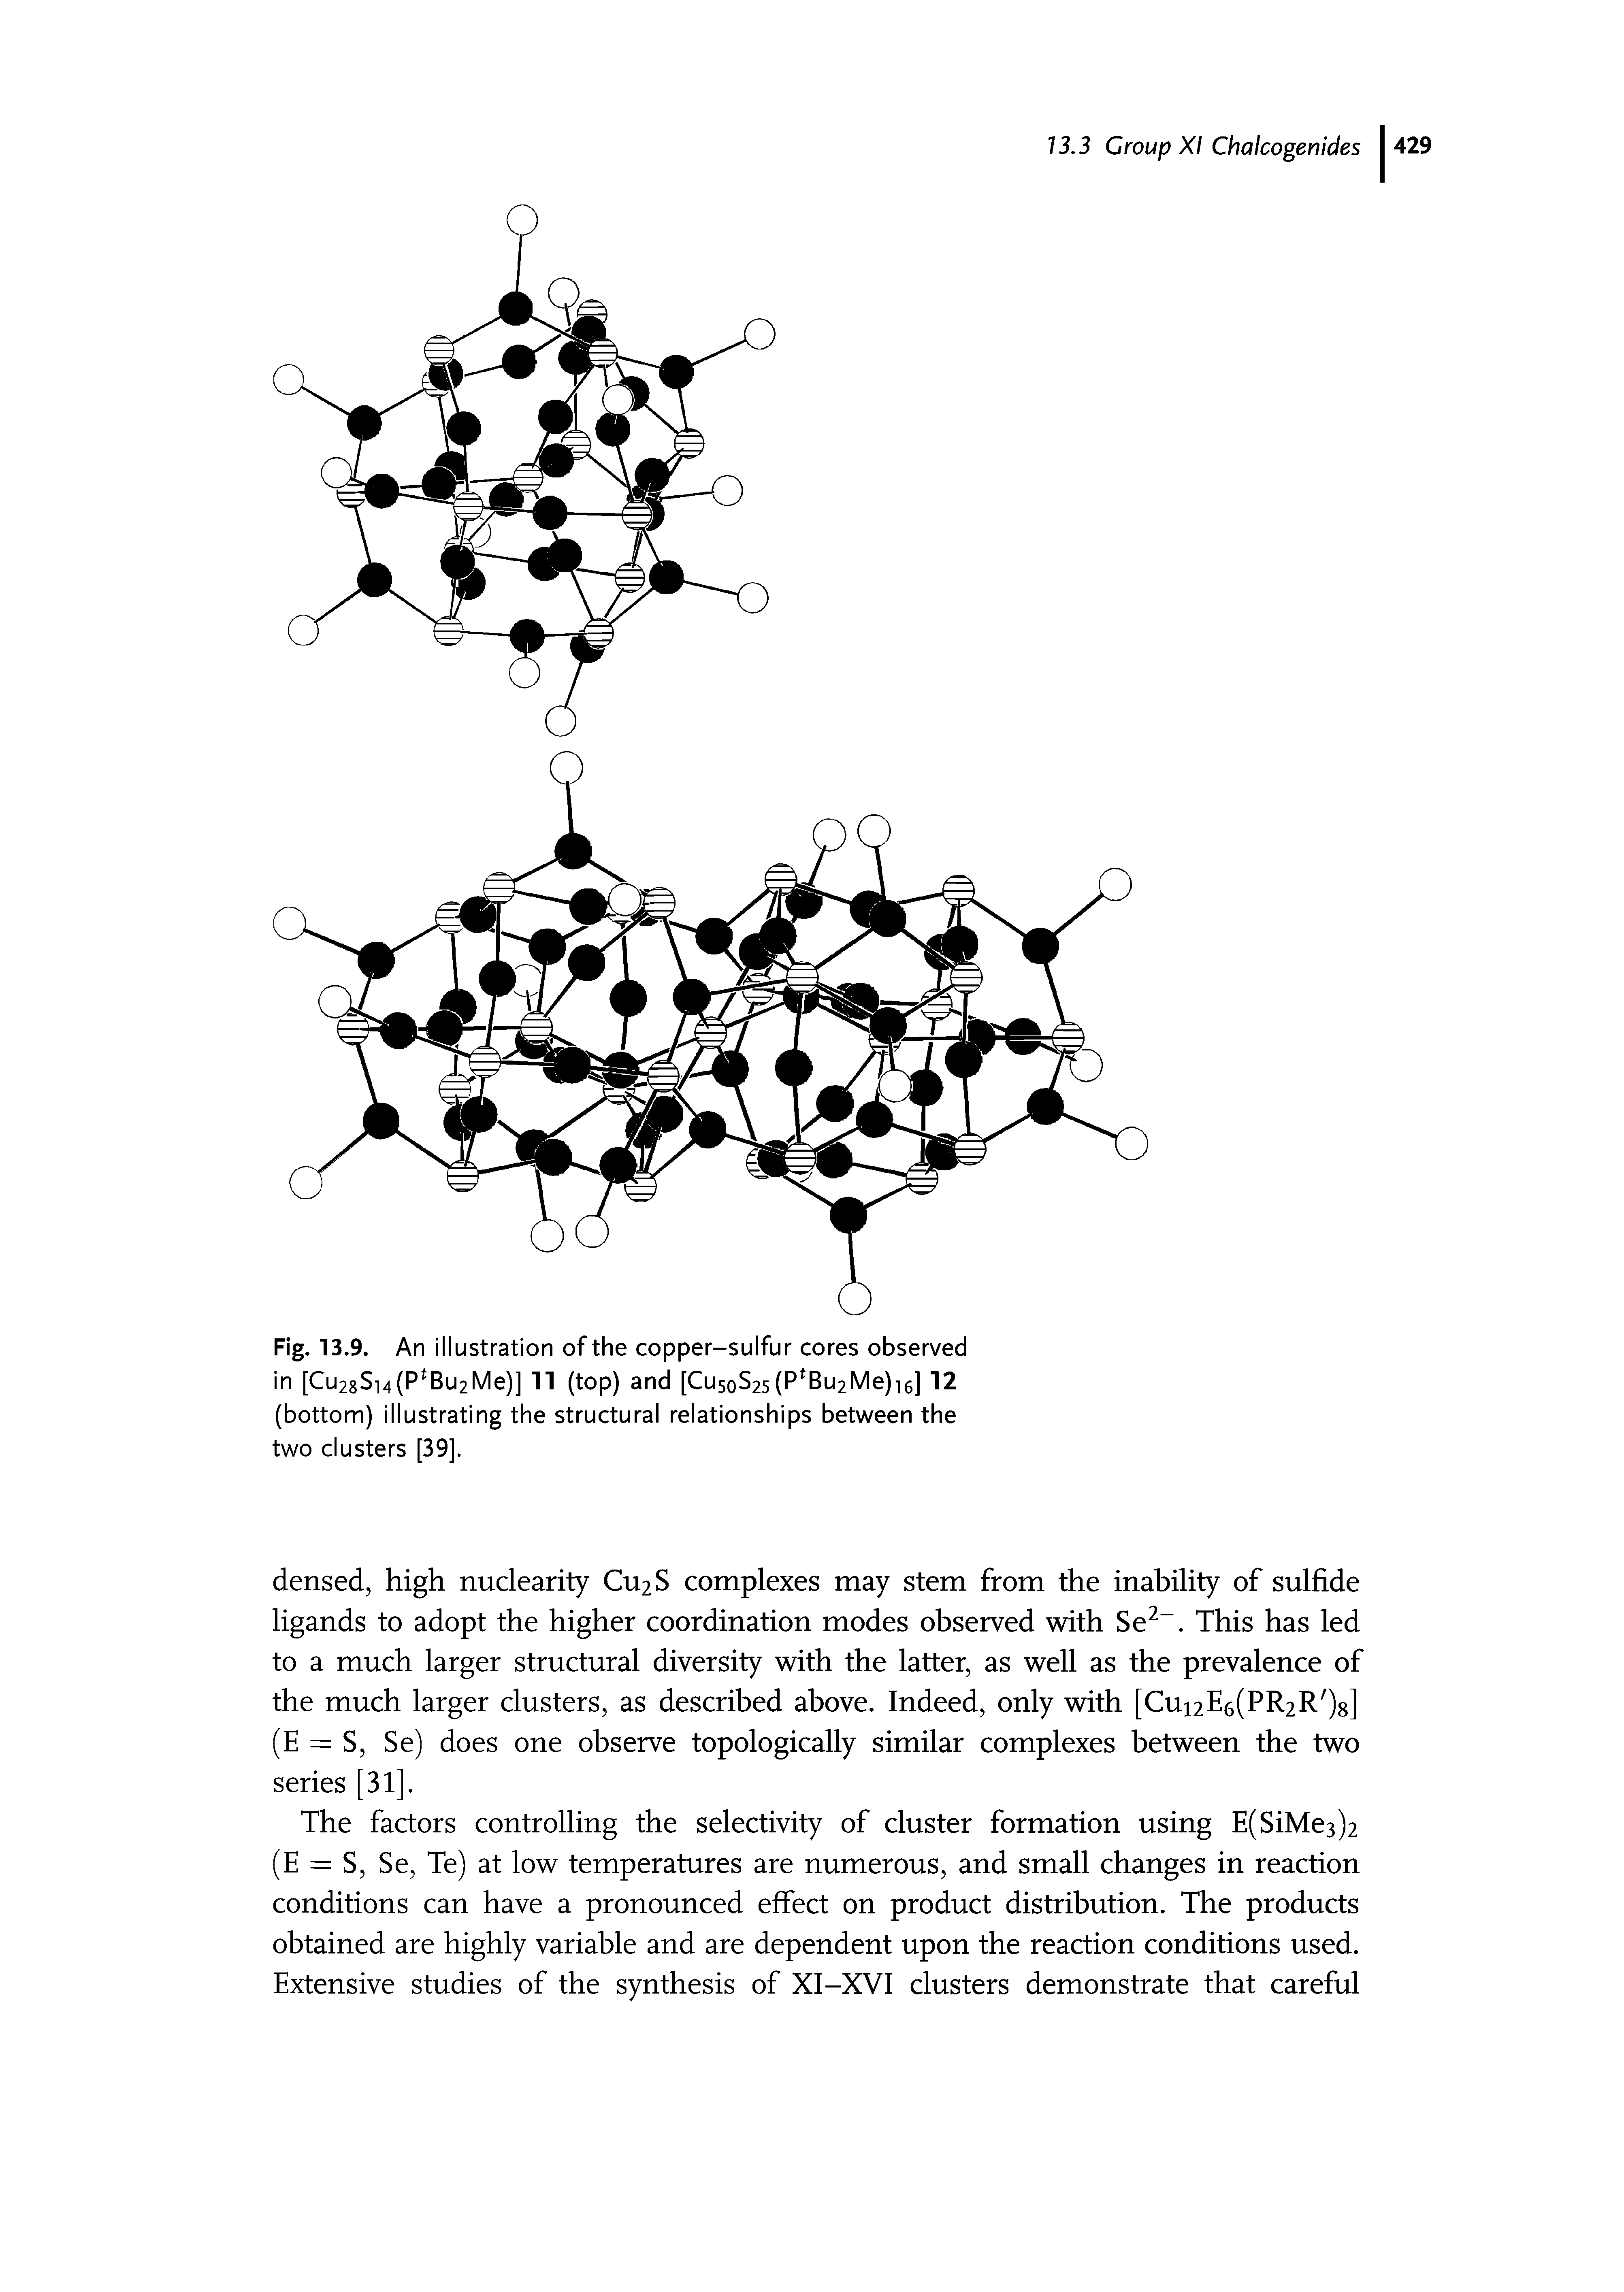 Fig. 13.9. An illustration of the copper-sulfur cores observed in [Cu28Si4(P Bu2Me)] 11 (top) and [CU50S25(P Bu2Me)i6] 12 (bottom) illustrating the structural relationships between the two clusters [39].